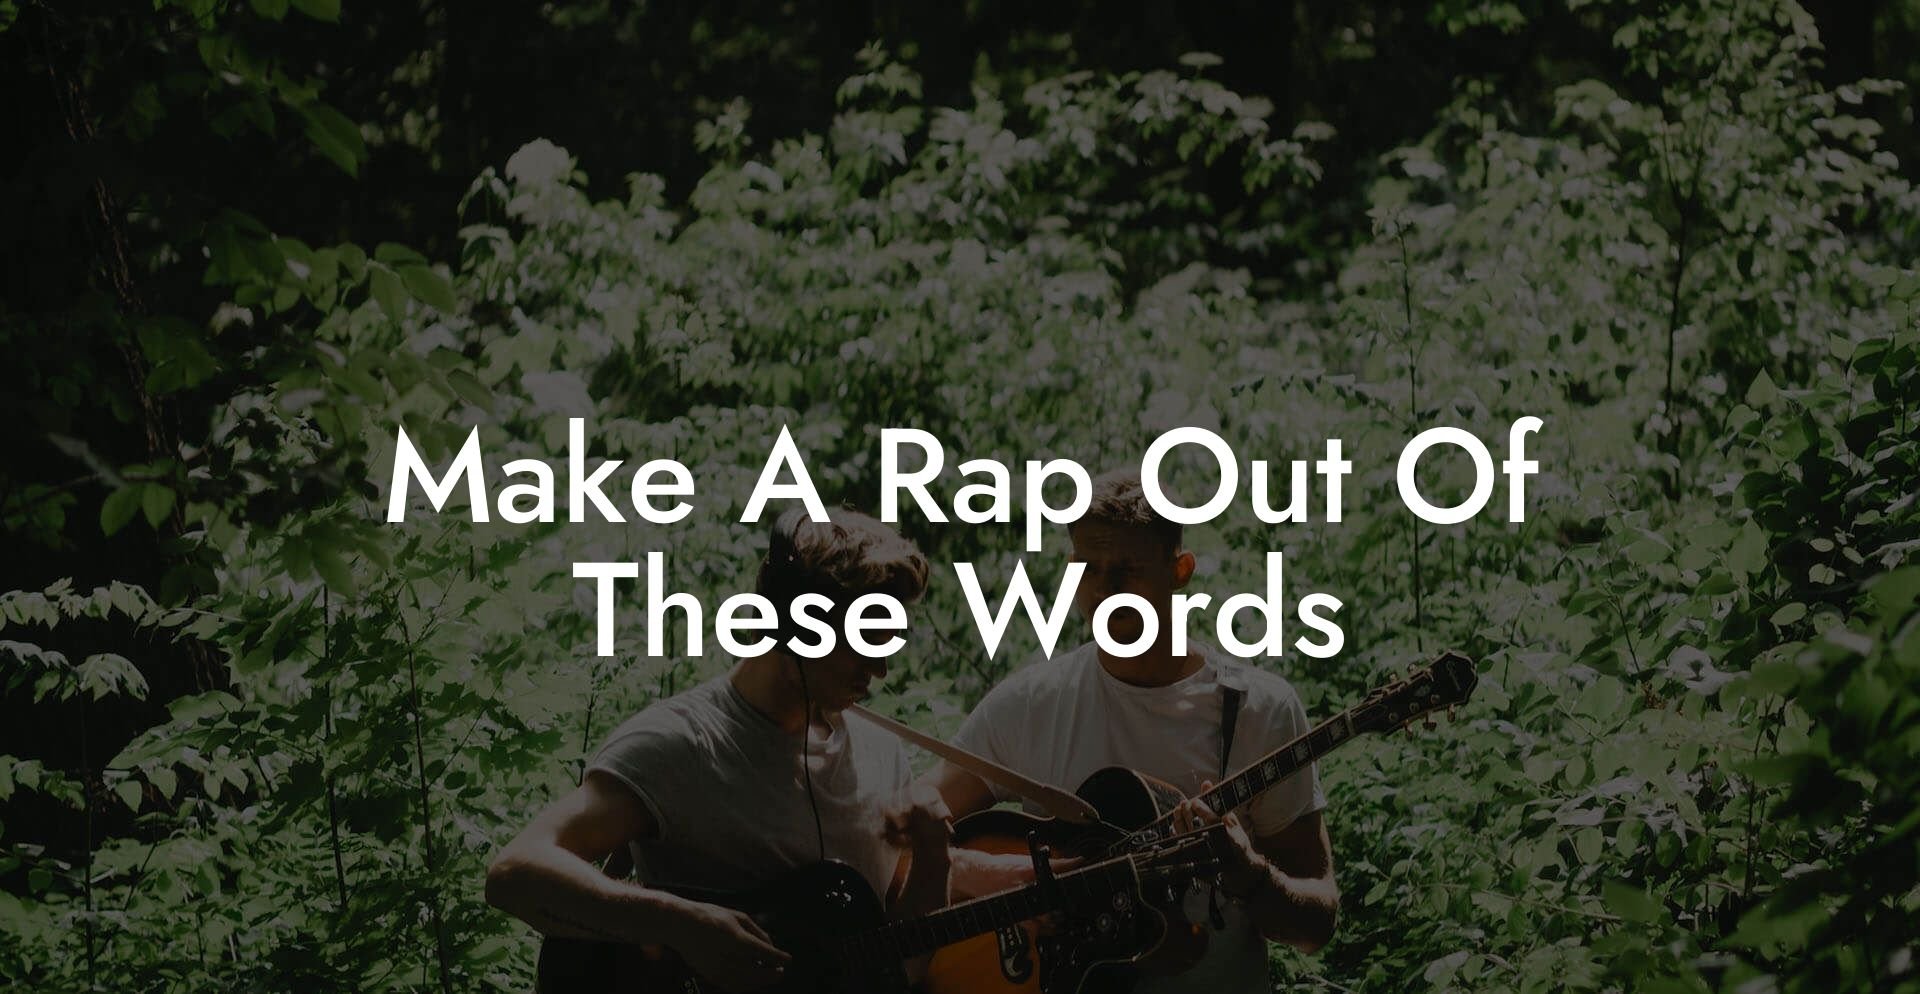 make a rap out of these words lyric assistant